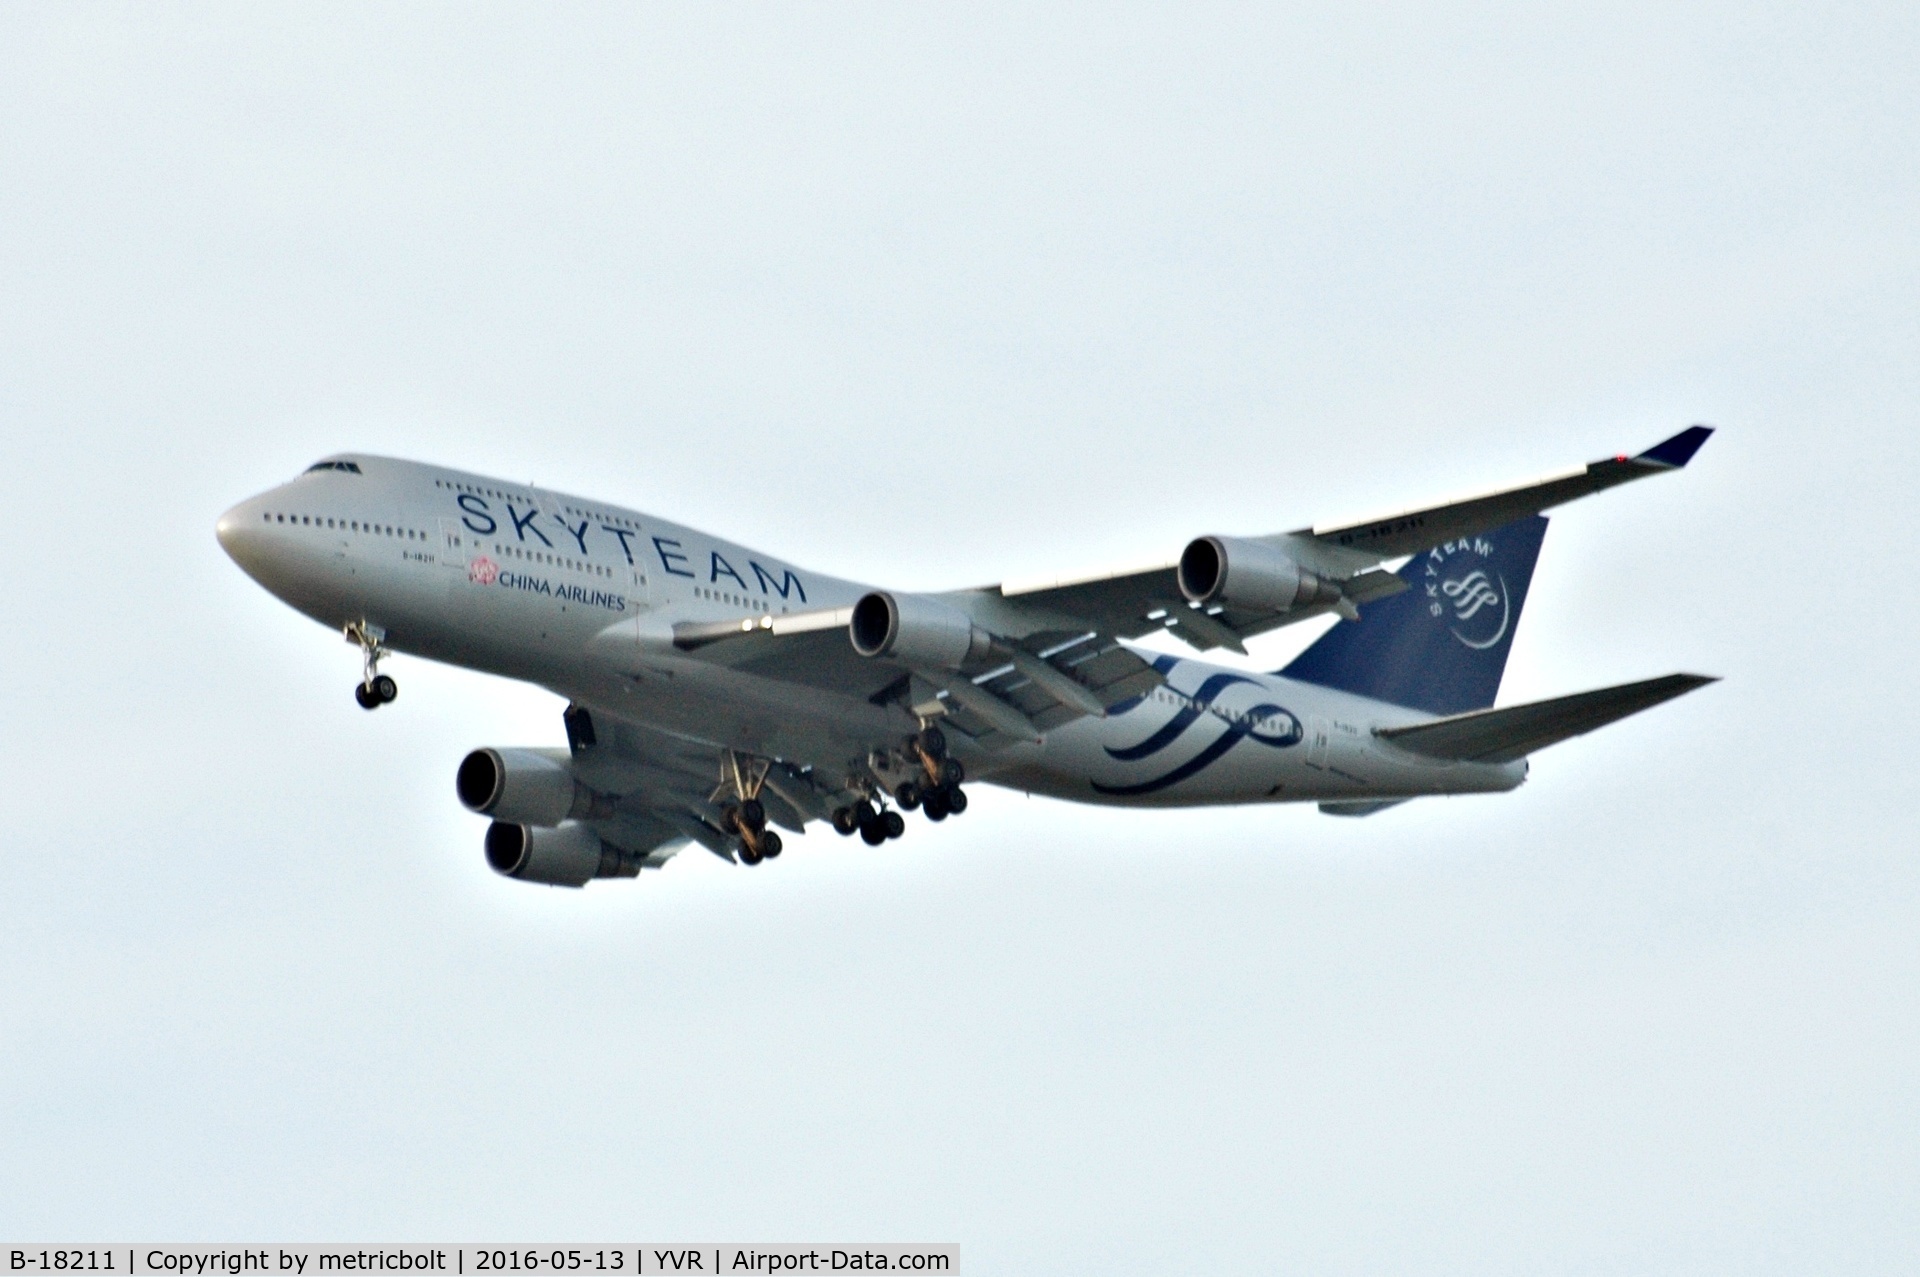 B-18211, 2004 Boeing 747-409 C/N 33735, Now in Skyteam livery. CI32 from Taipei